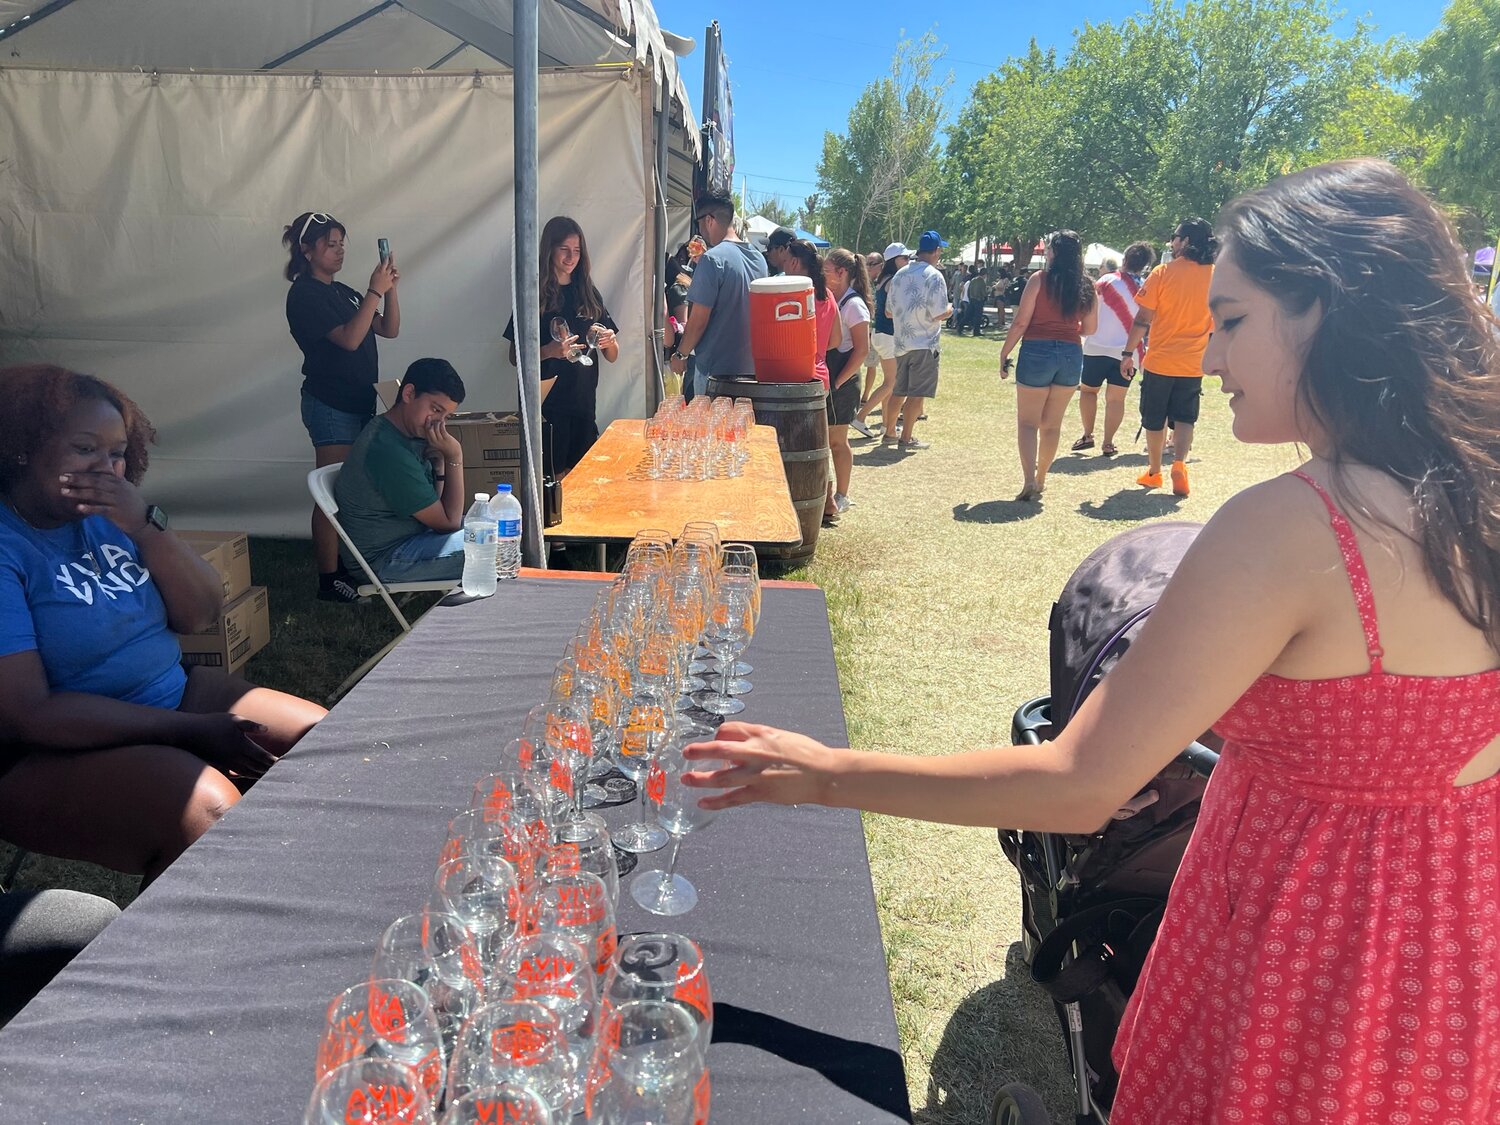 This year’s Harvest Wine Festival is Saturday through Monday at the fairgrounds. Food vendors, arts and crafts and more than 200 wines from 18 New Mexico wineries will be there.